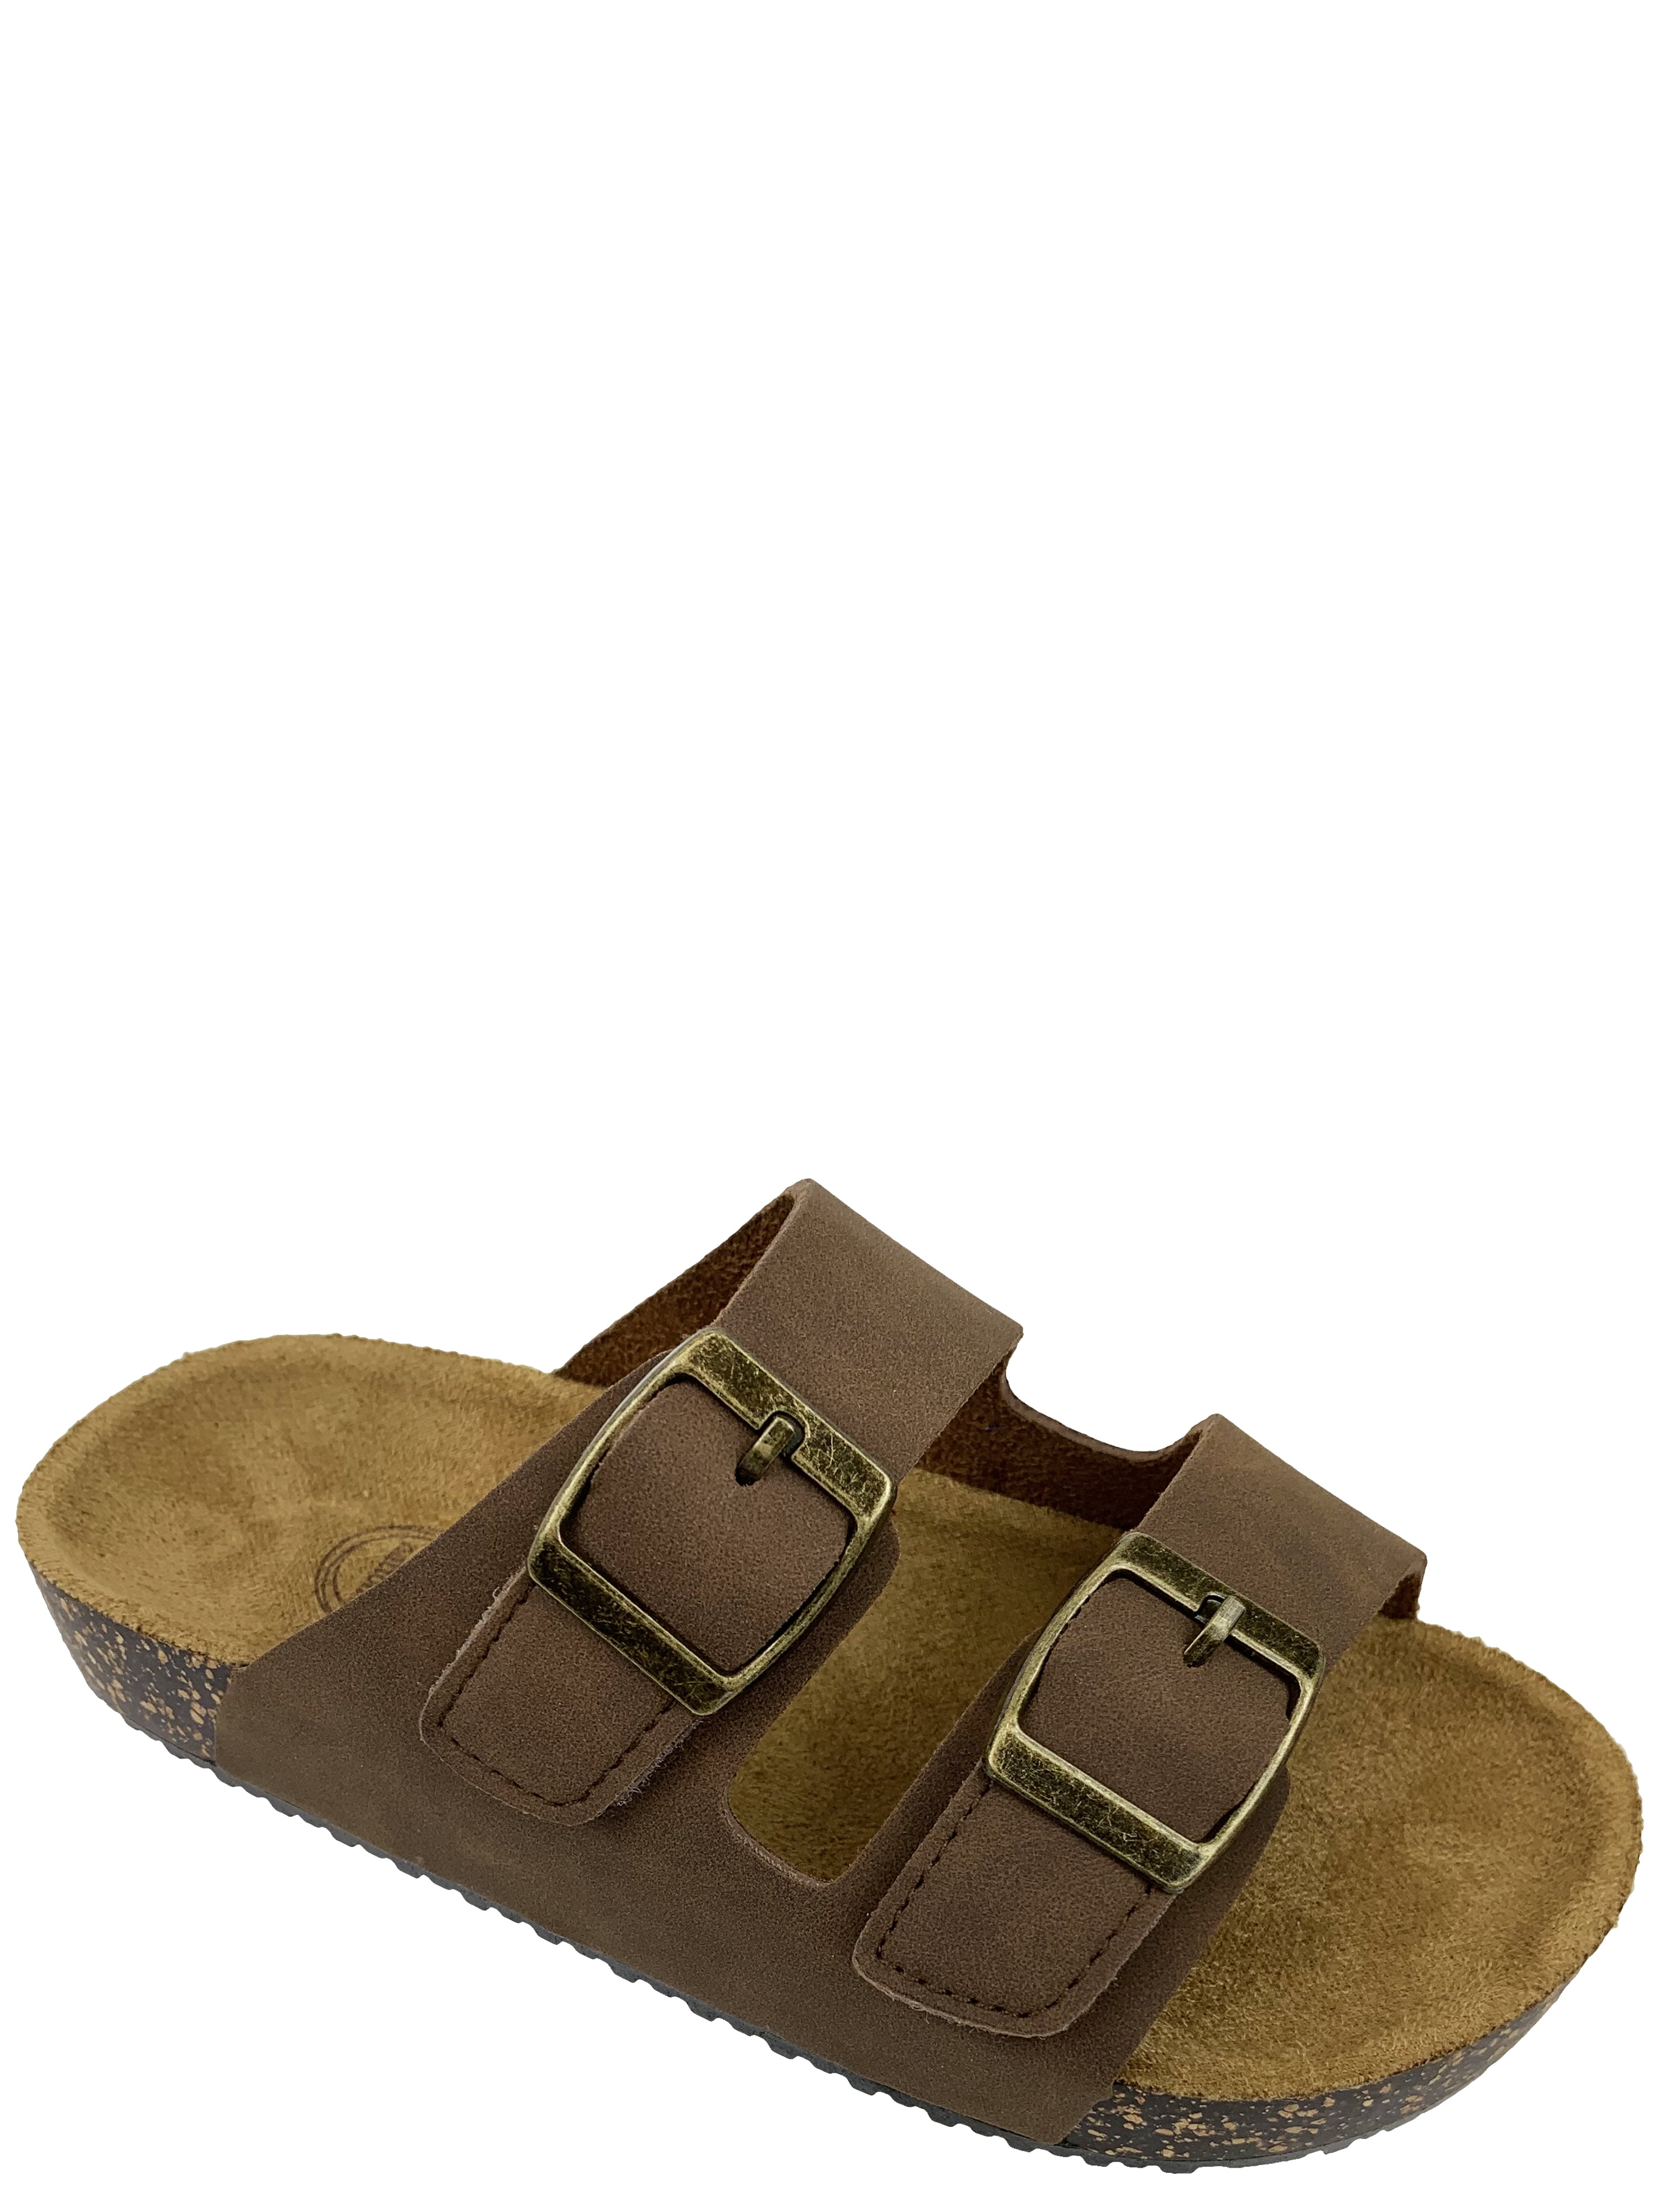 Psykiatri daytime tema Wonder Nation Boys' and Girls' Sandals, Two Straps, Faux Leather with  Buckles, Comfort Flexi-Cork, Brown, Kids Size 12 - Walmart.com